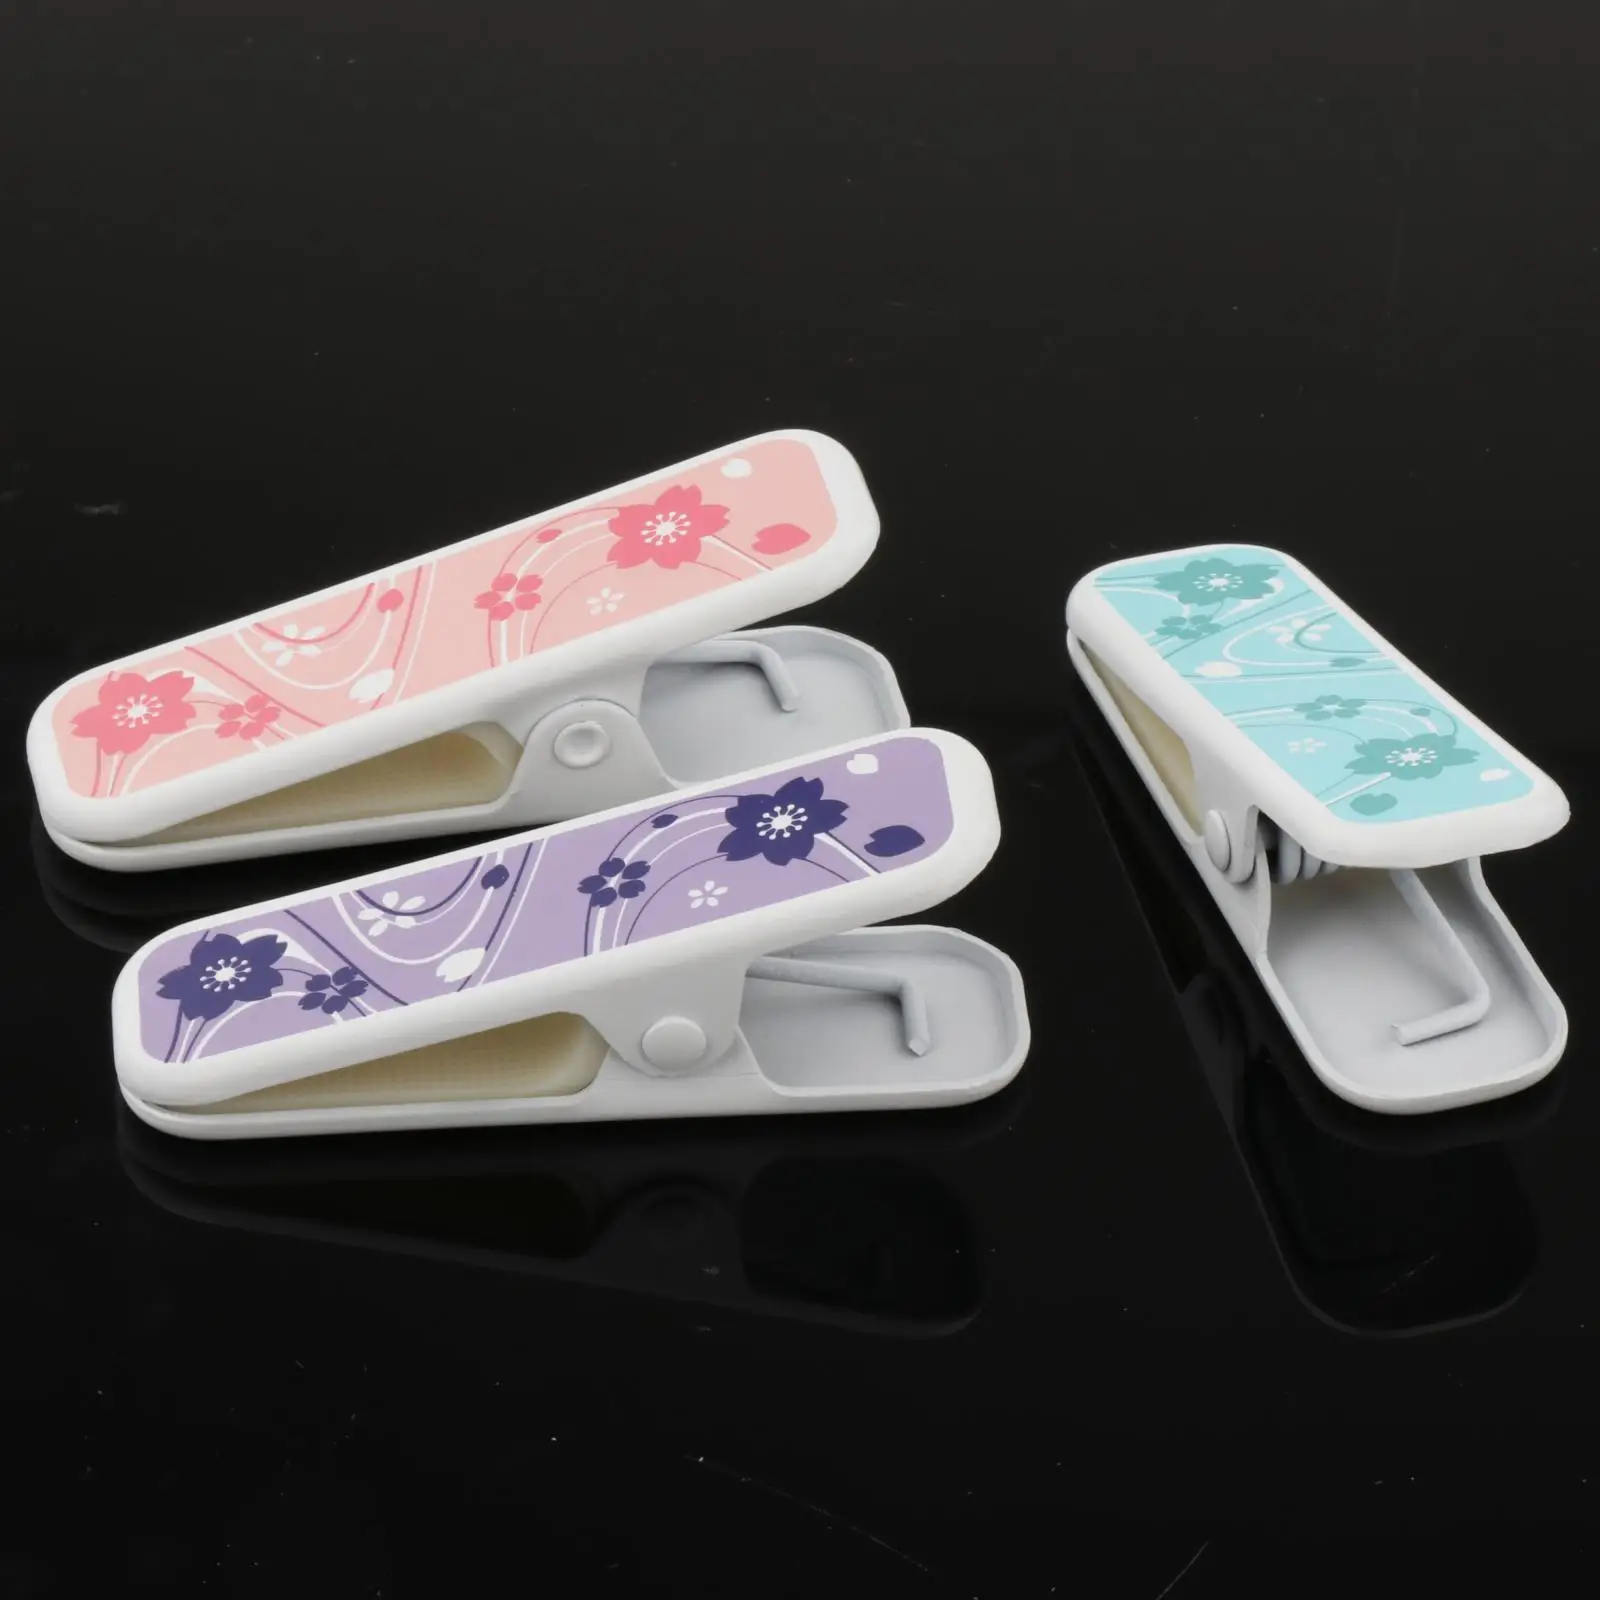 3Pcs Kimono Clips for Kimono Hobbyists Even Beginners Premium Covered with Silicone to Avoid Damage to Fabric Perfect Gift